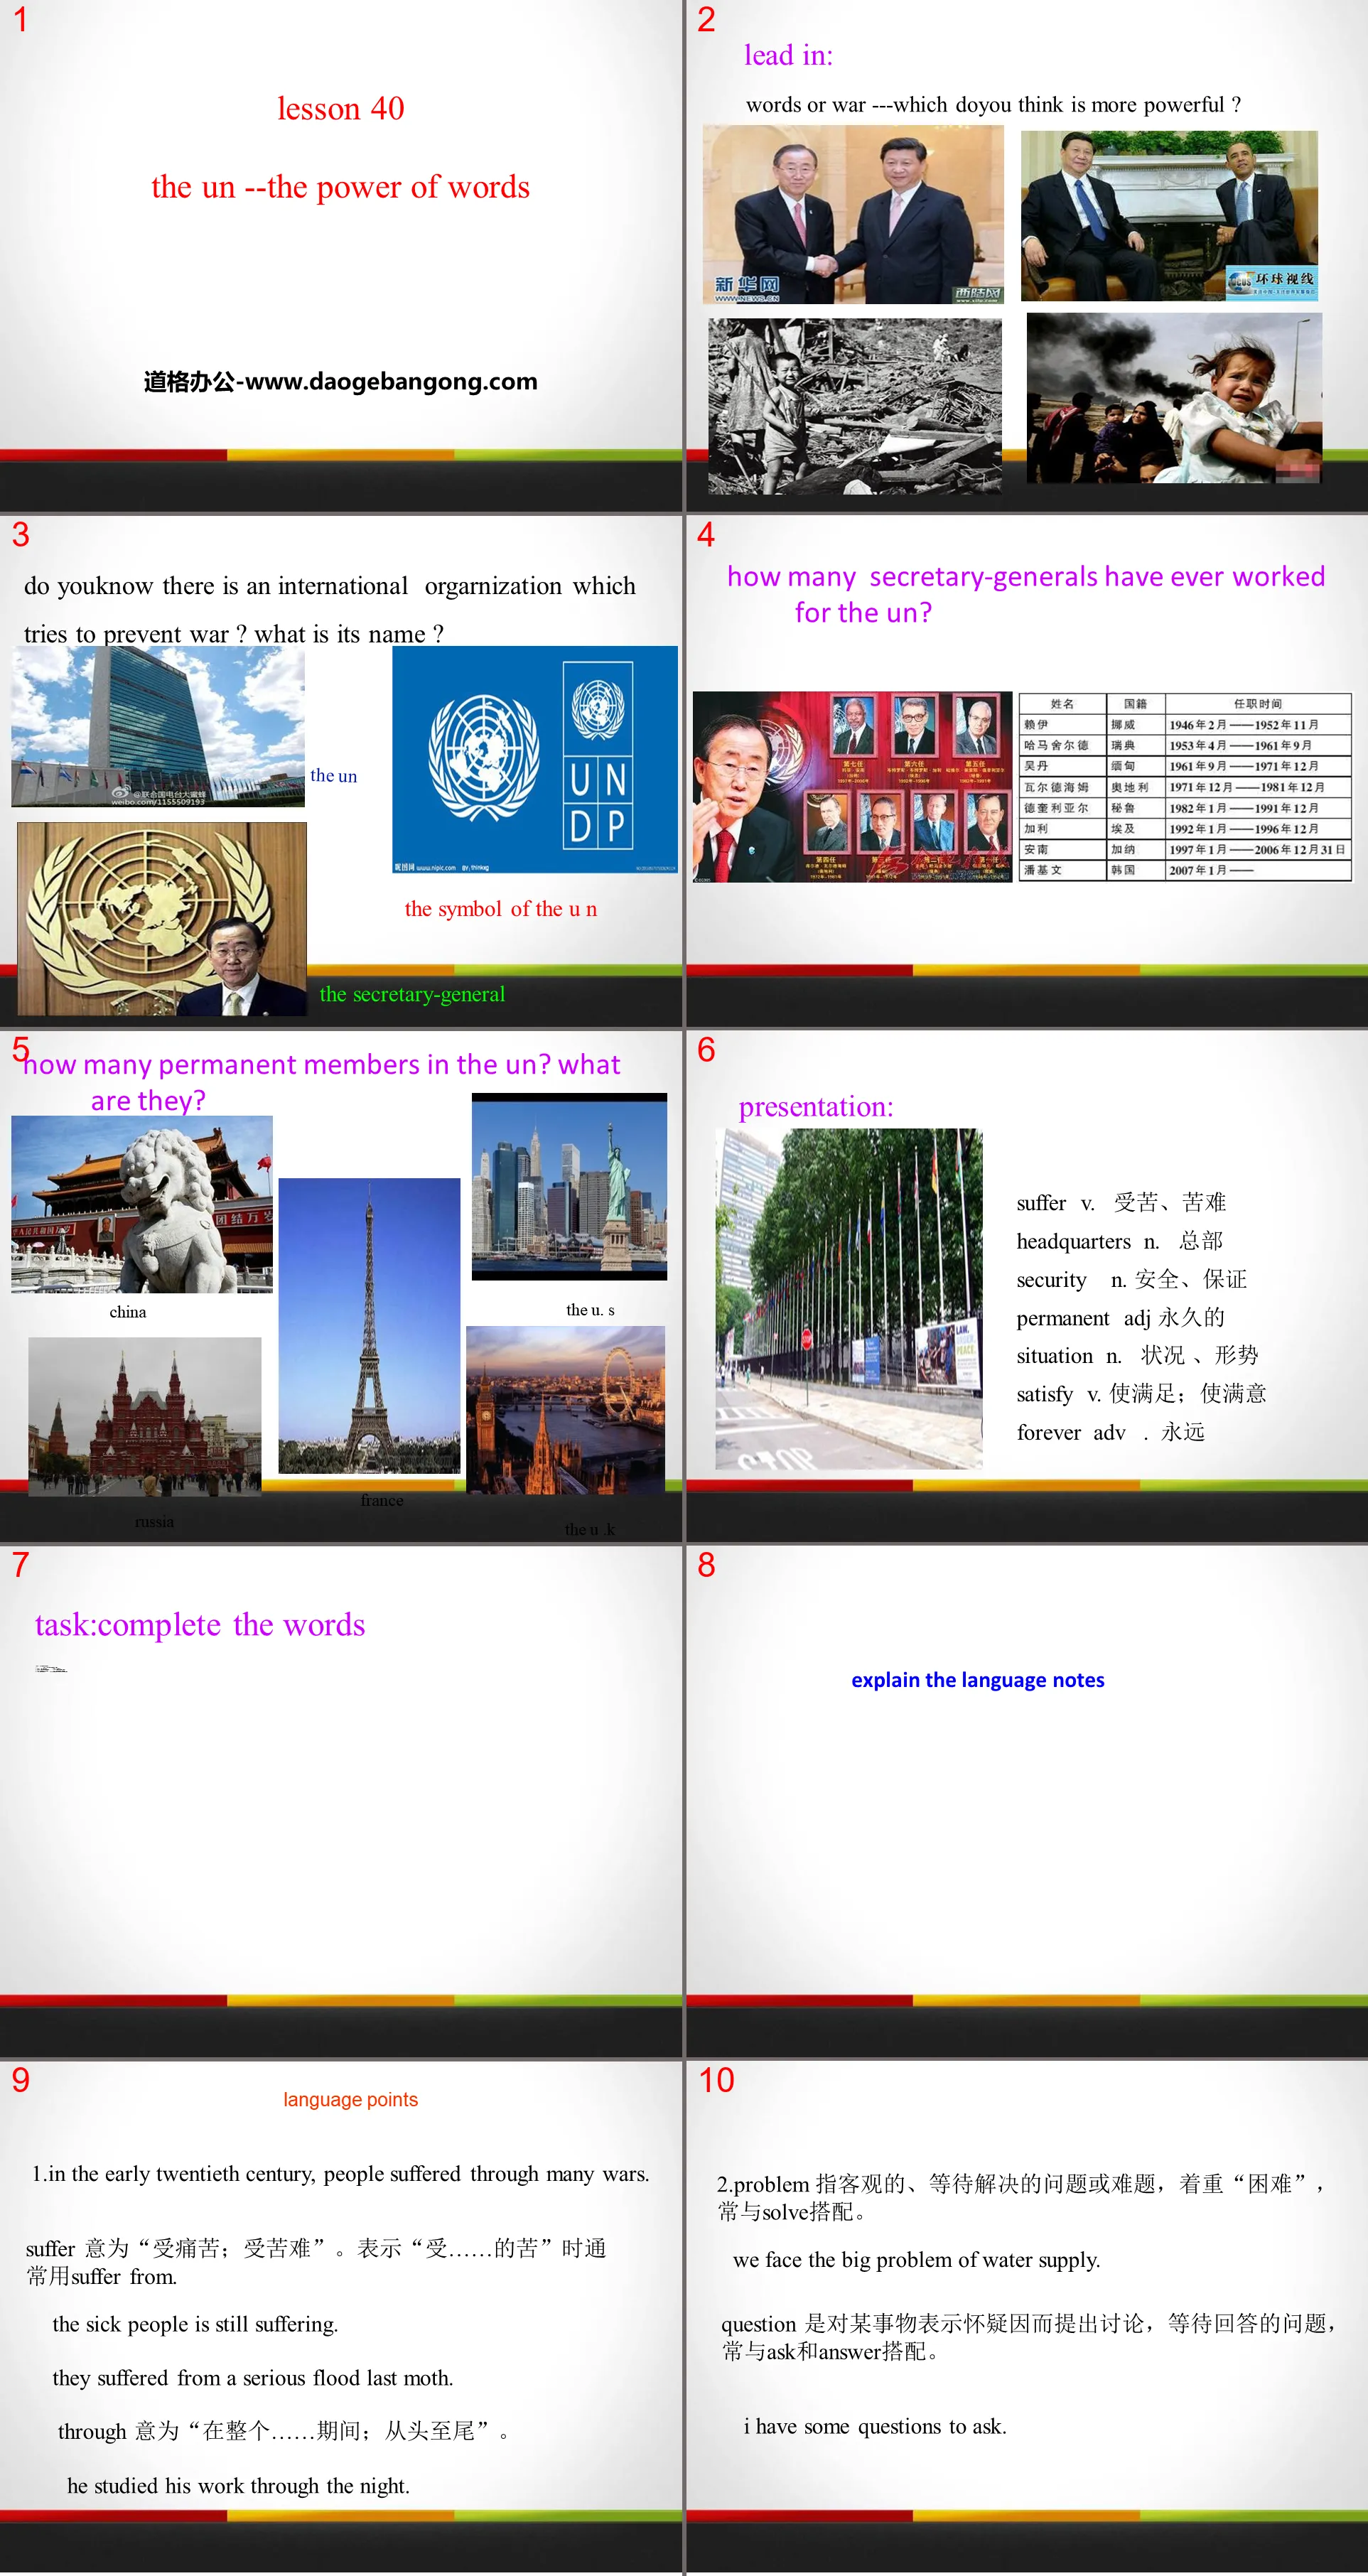 "The UN-The Power of Words" Work for Peace PPT courseware